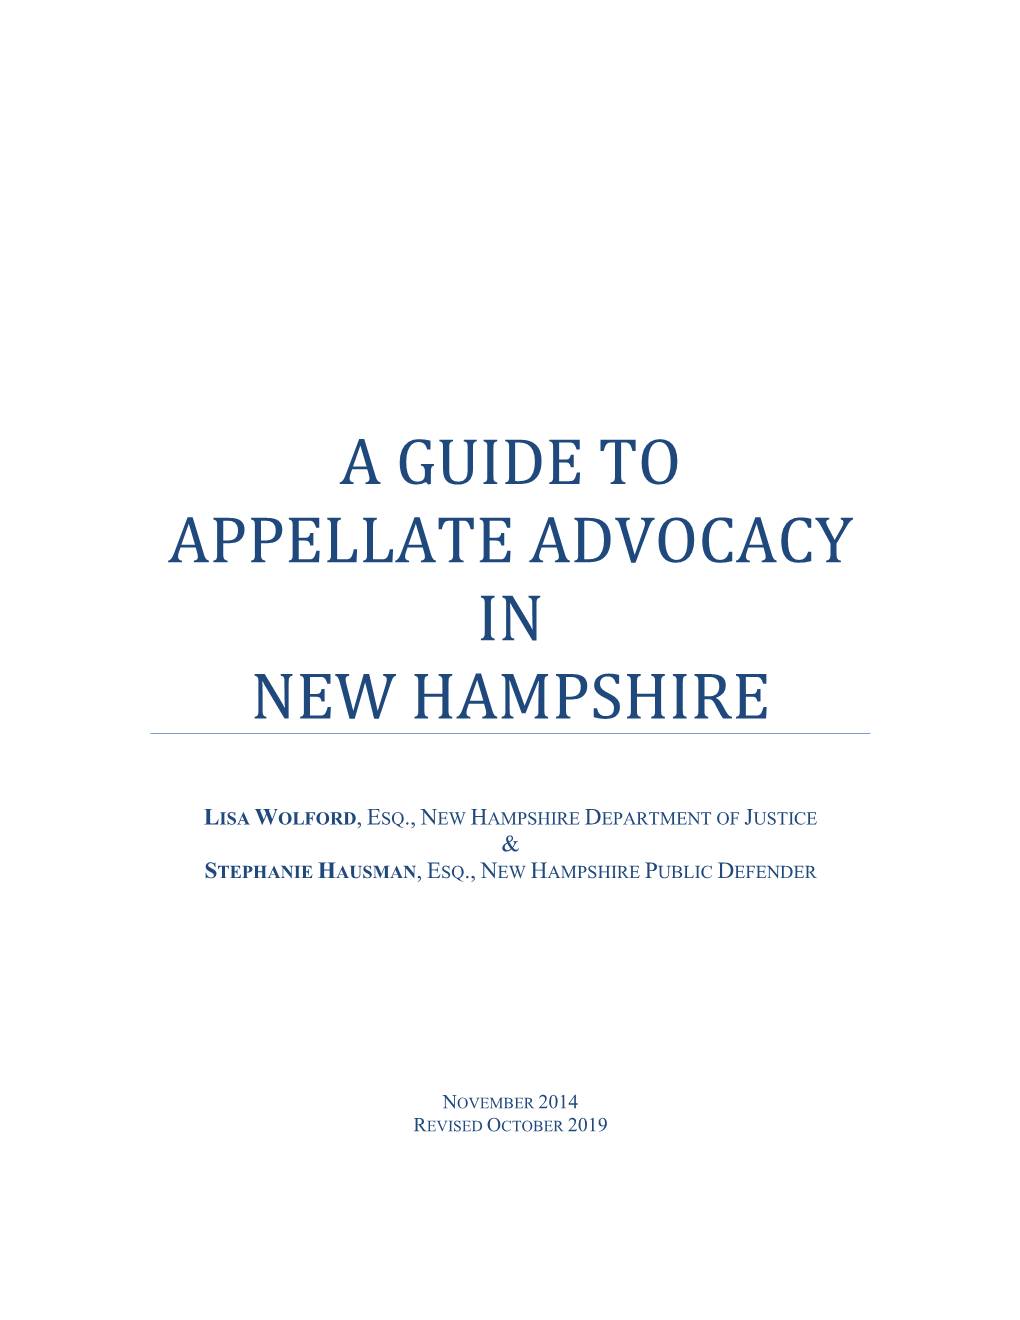 A Guide to Appellate Advocacy in New Hampshire